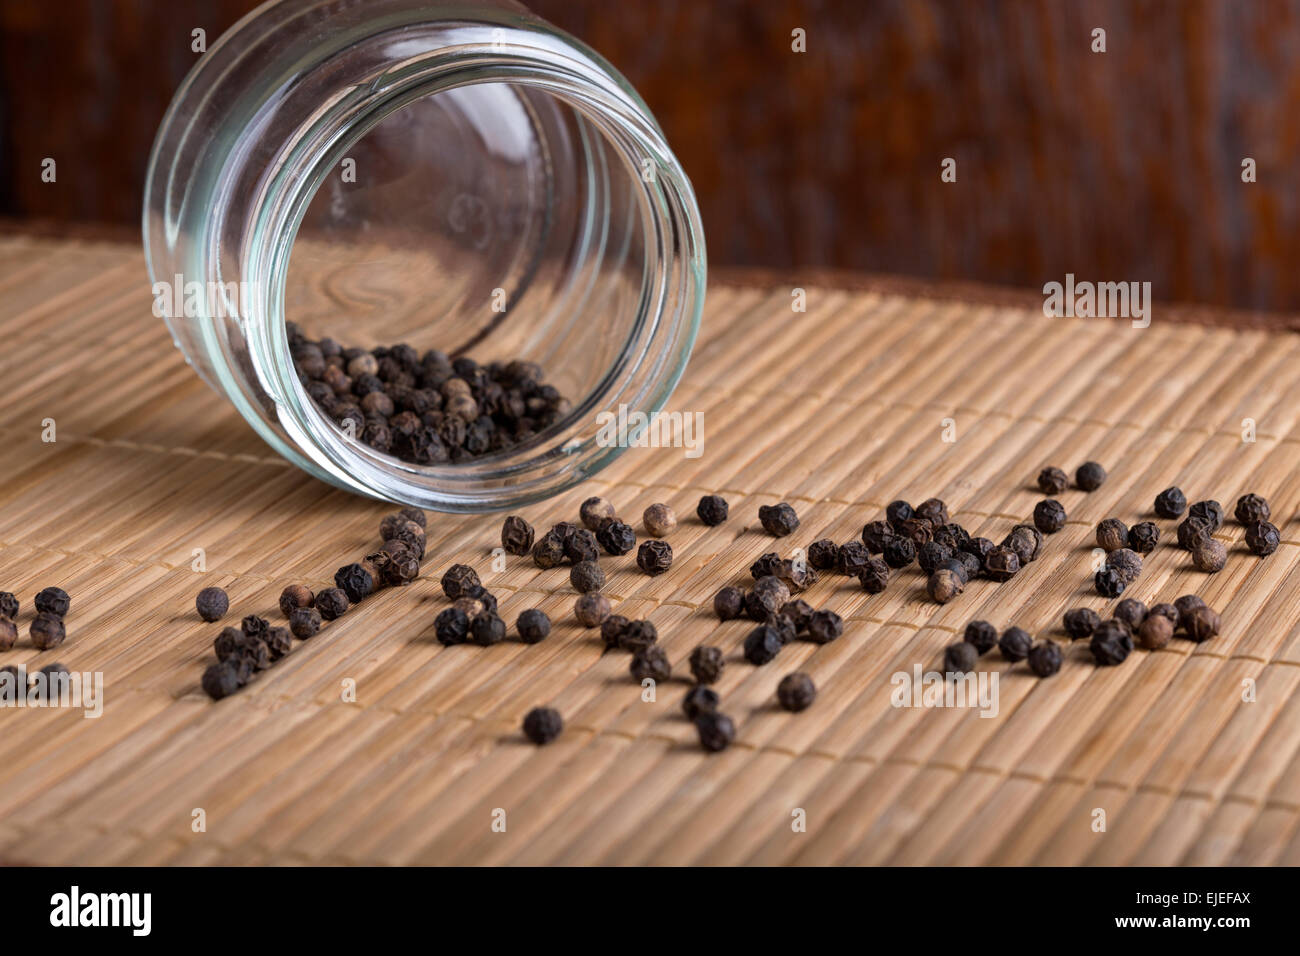 https://c8.alamy.com/comp/EJEFAX/black-pepper-in-the-inverted-jar-with-glass-on-wooden-background-EJEFAX.jpg